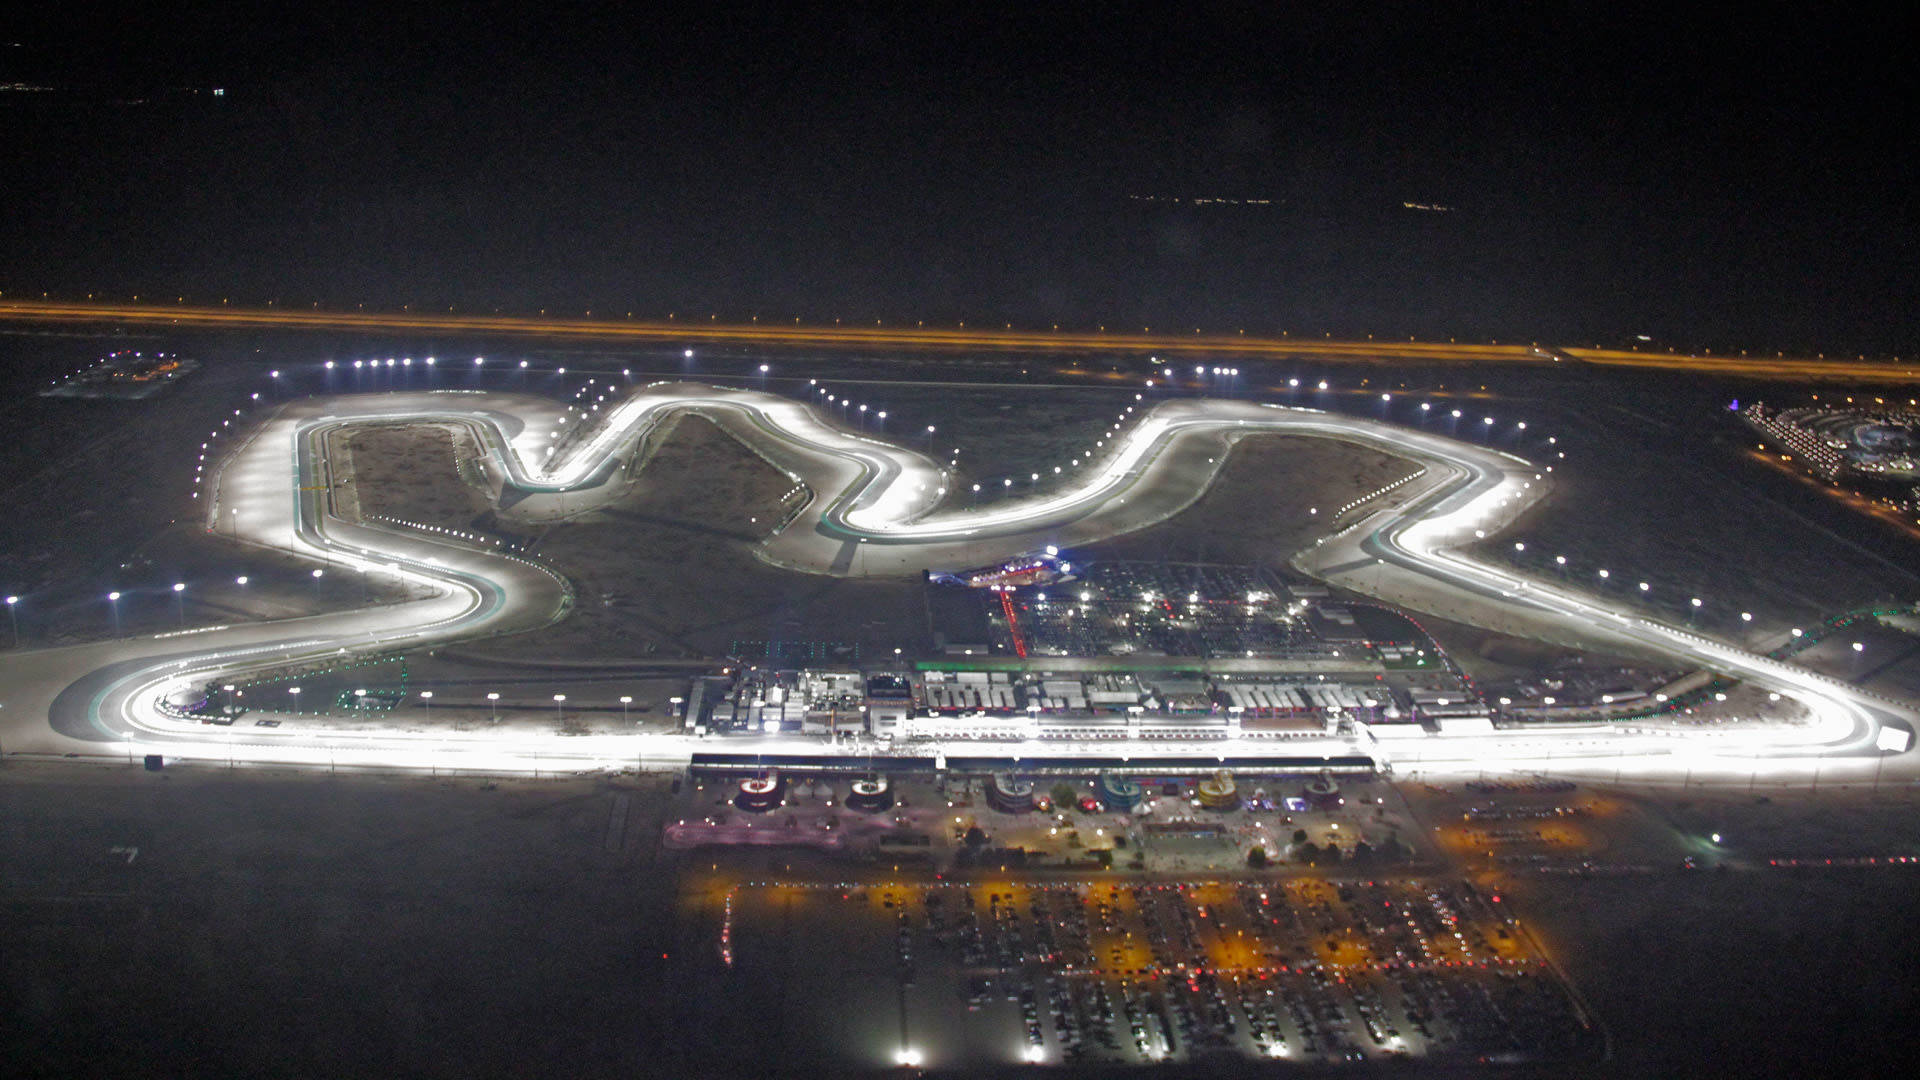 The performance swing, Lap 48 fallout and a first F1 race at Losail – 5 storylines we're excited about ahead of the Qatar Grand Prix | Formula 1®